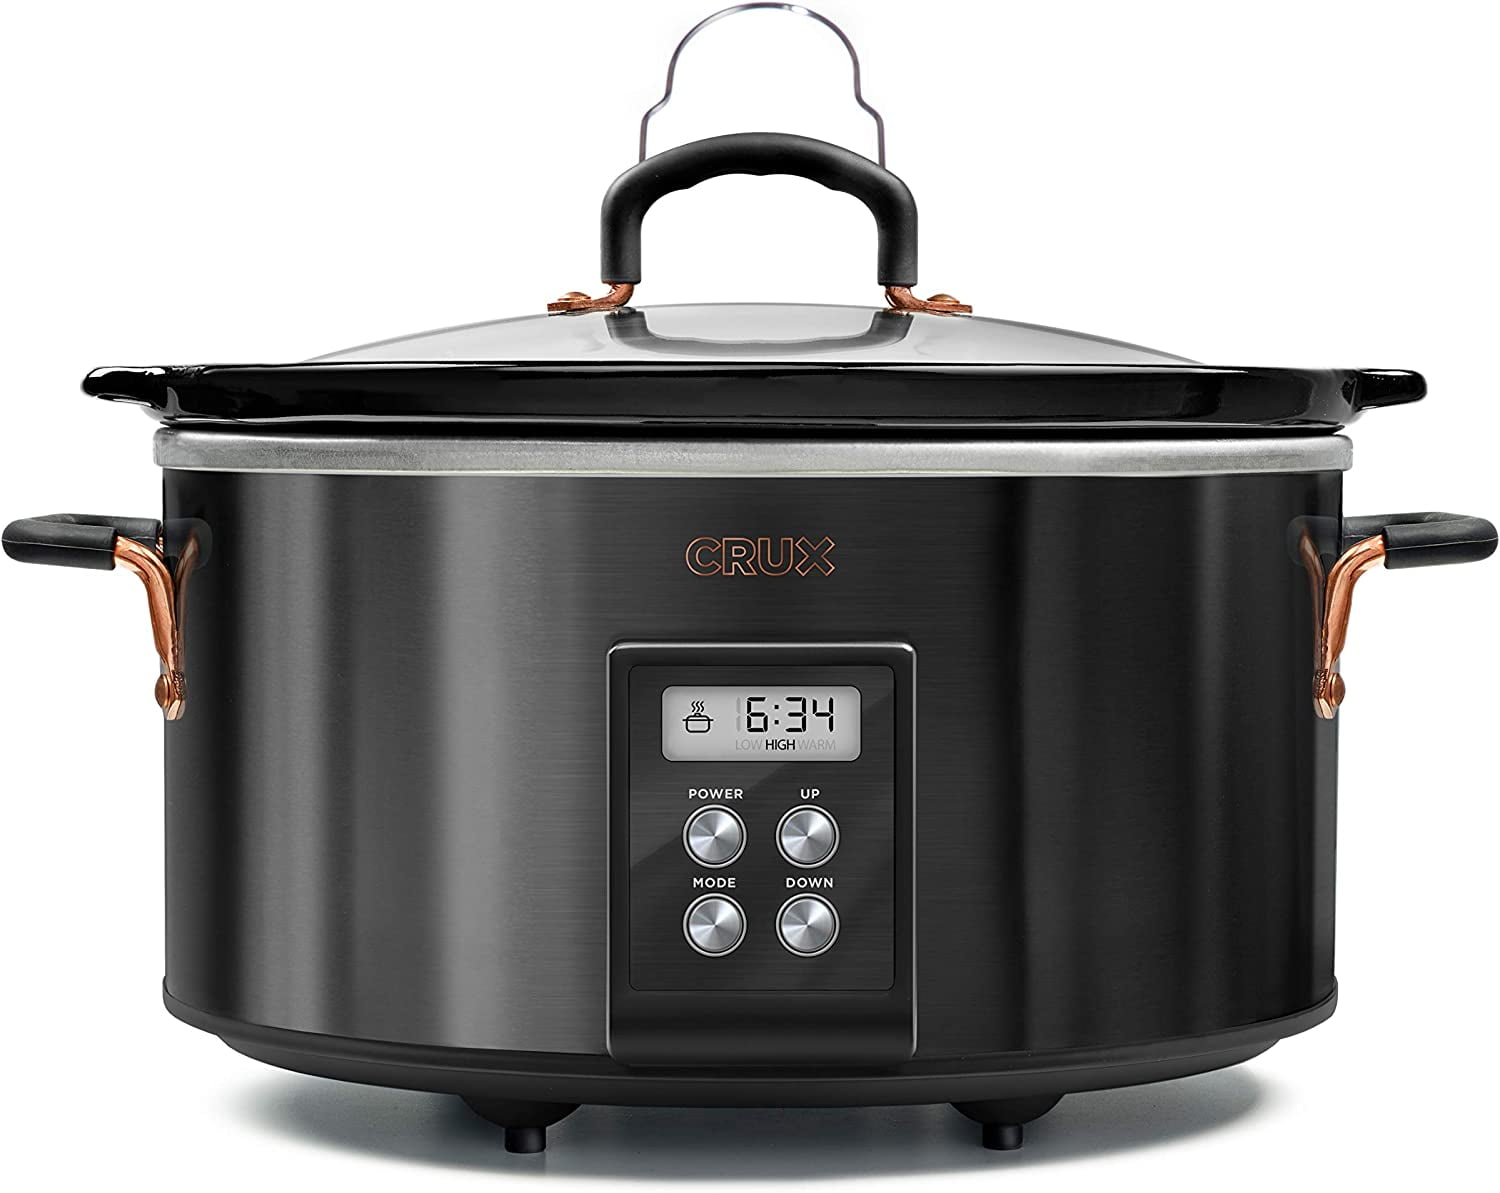 Presto 6 Qt. Nomad-Traveling Red Insulated Slow Cooker with